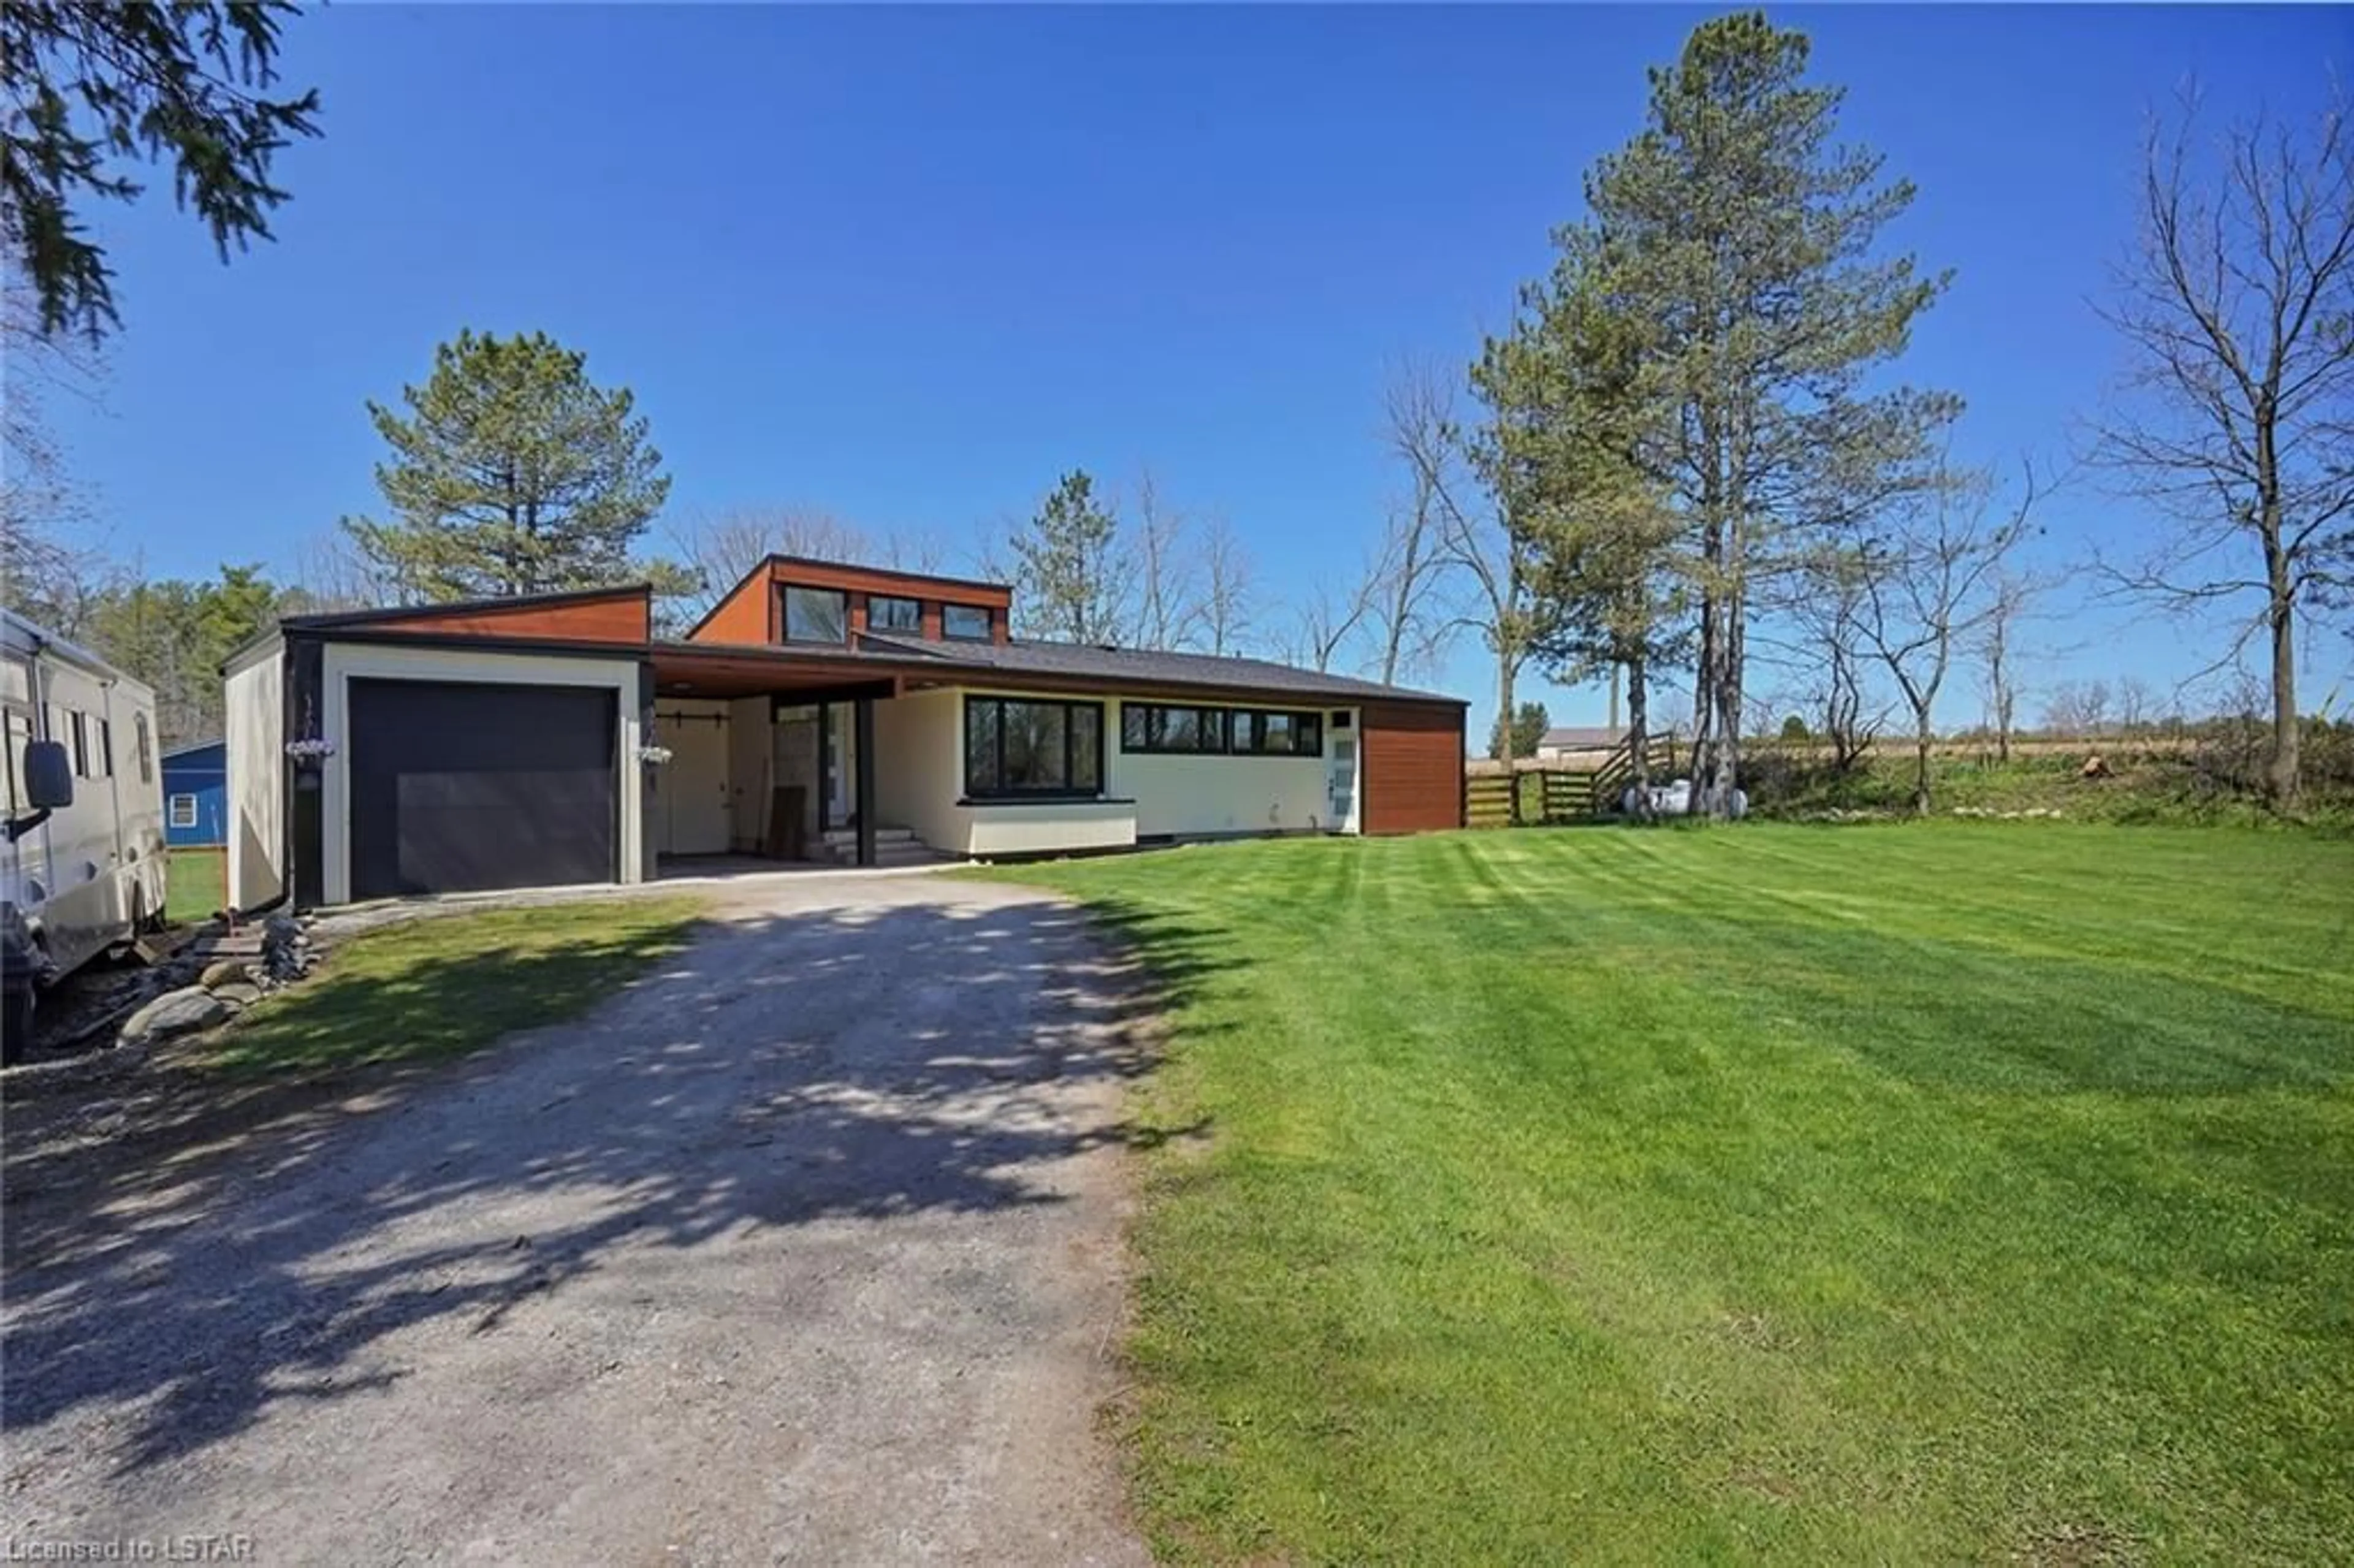 Cottage for 34159 Maguire Rd, Ailsa Craig Ontario N0M 1A0